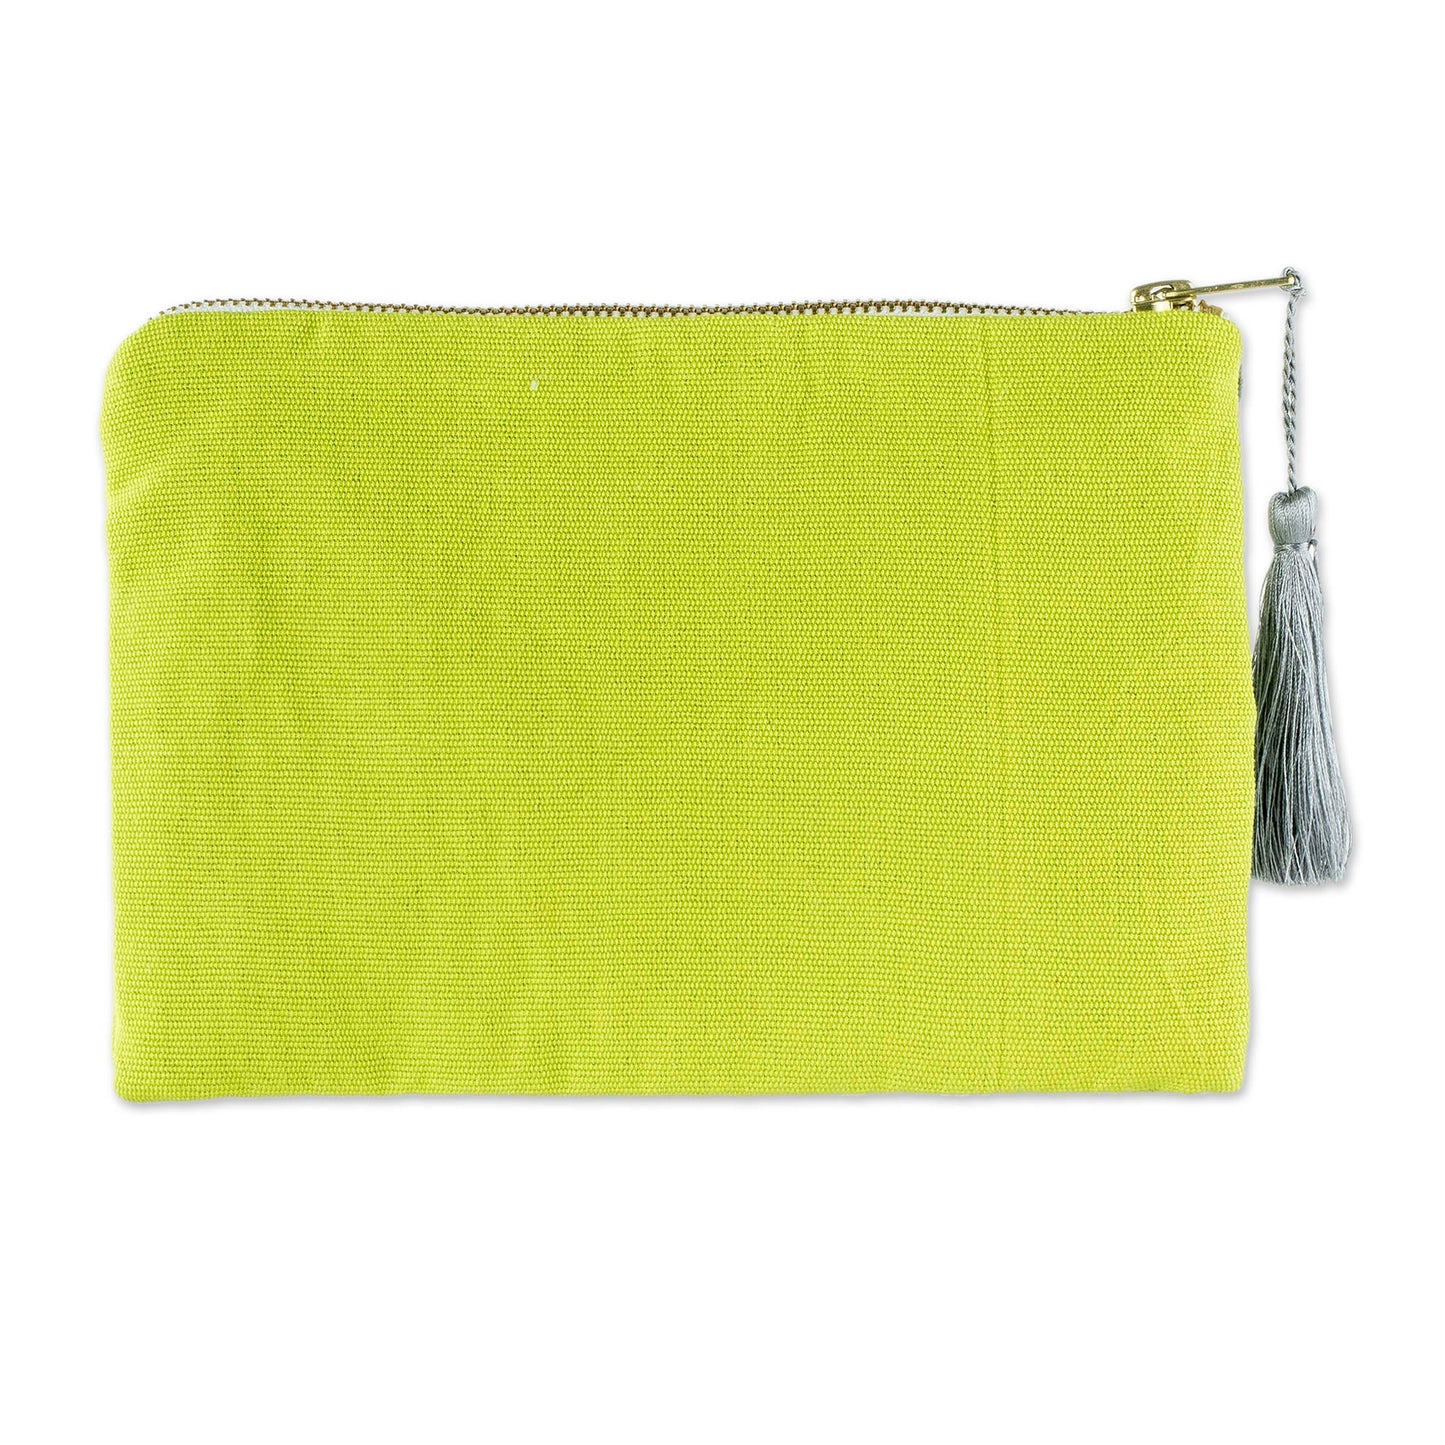 Golden Lime Sunshine Sun Motif Embroidered Chartreuse Cotton Cosmetic Bag